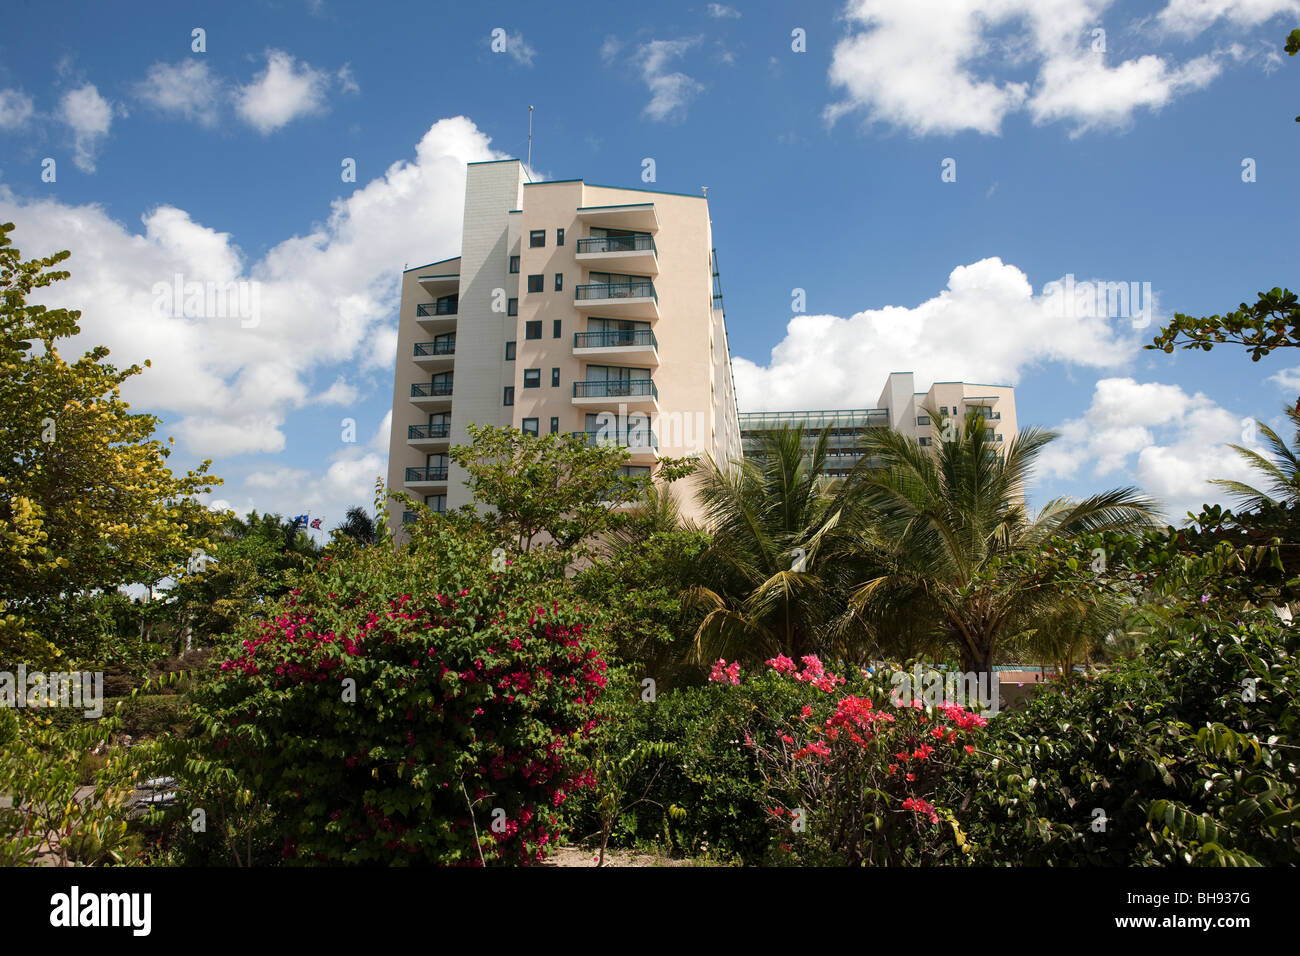 The Hilton Hotel on the outskirts of Bridgetown on the Caribbean island of Barbados Stock Photo